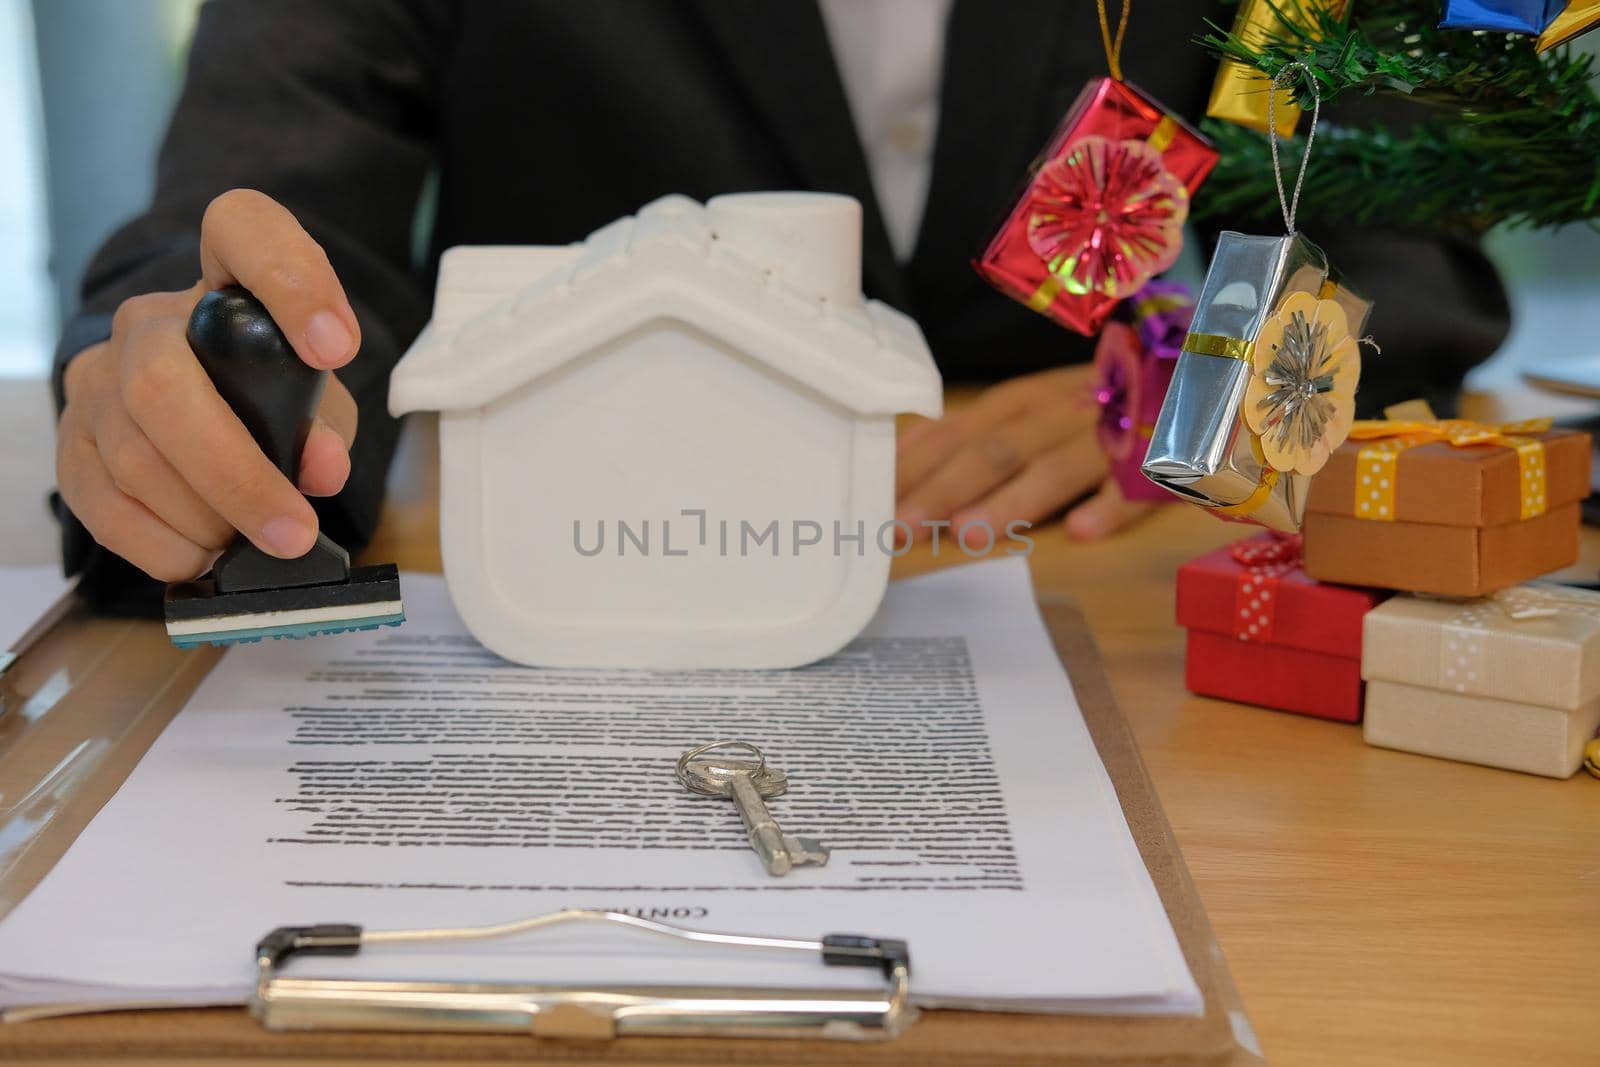 real estate agent with house key using stamper for stamping approved on mortgage loan contract agreement document during christmas